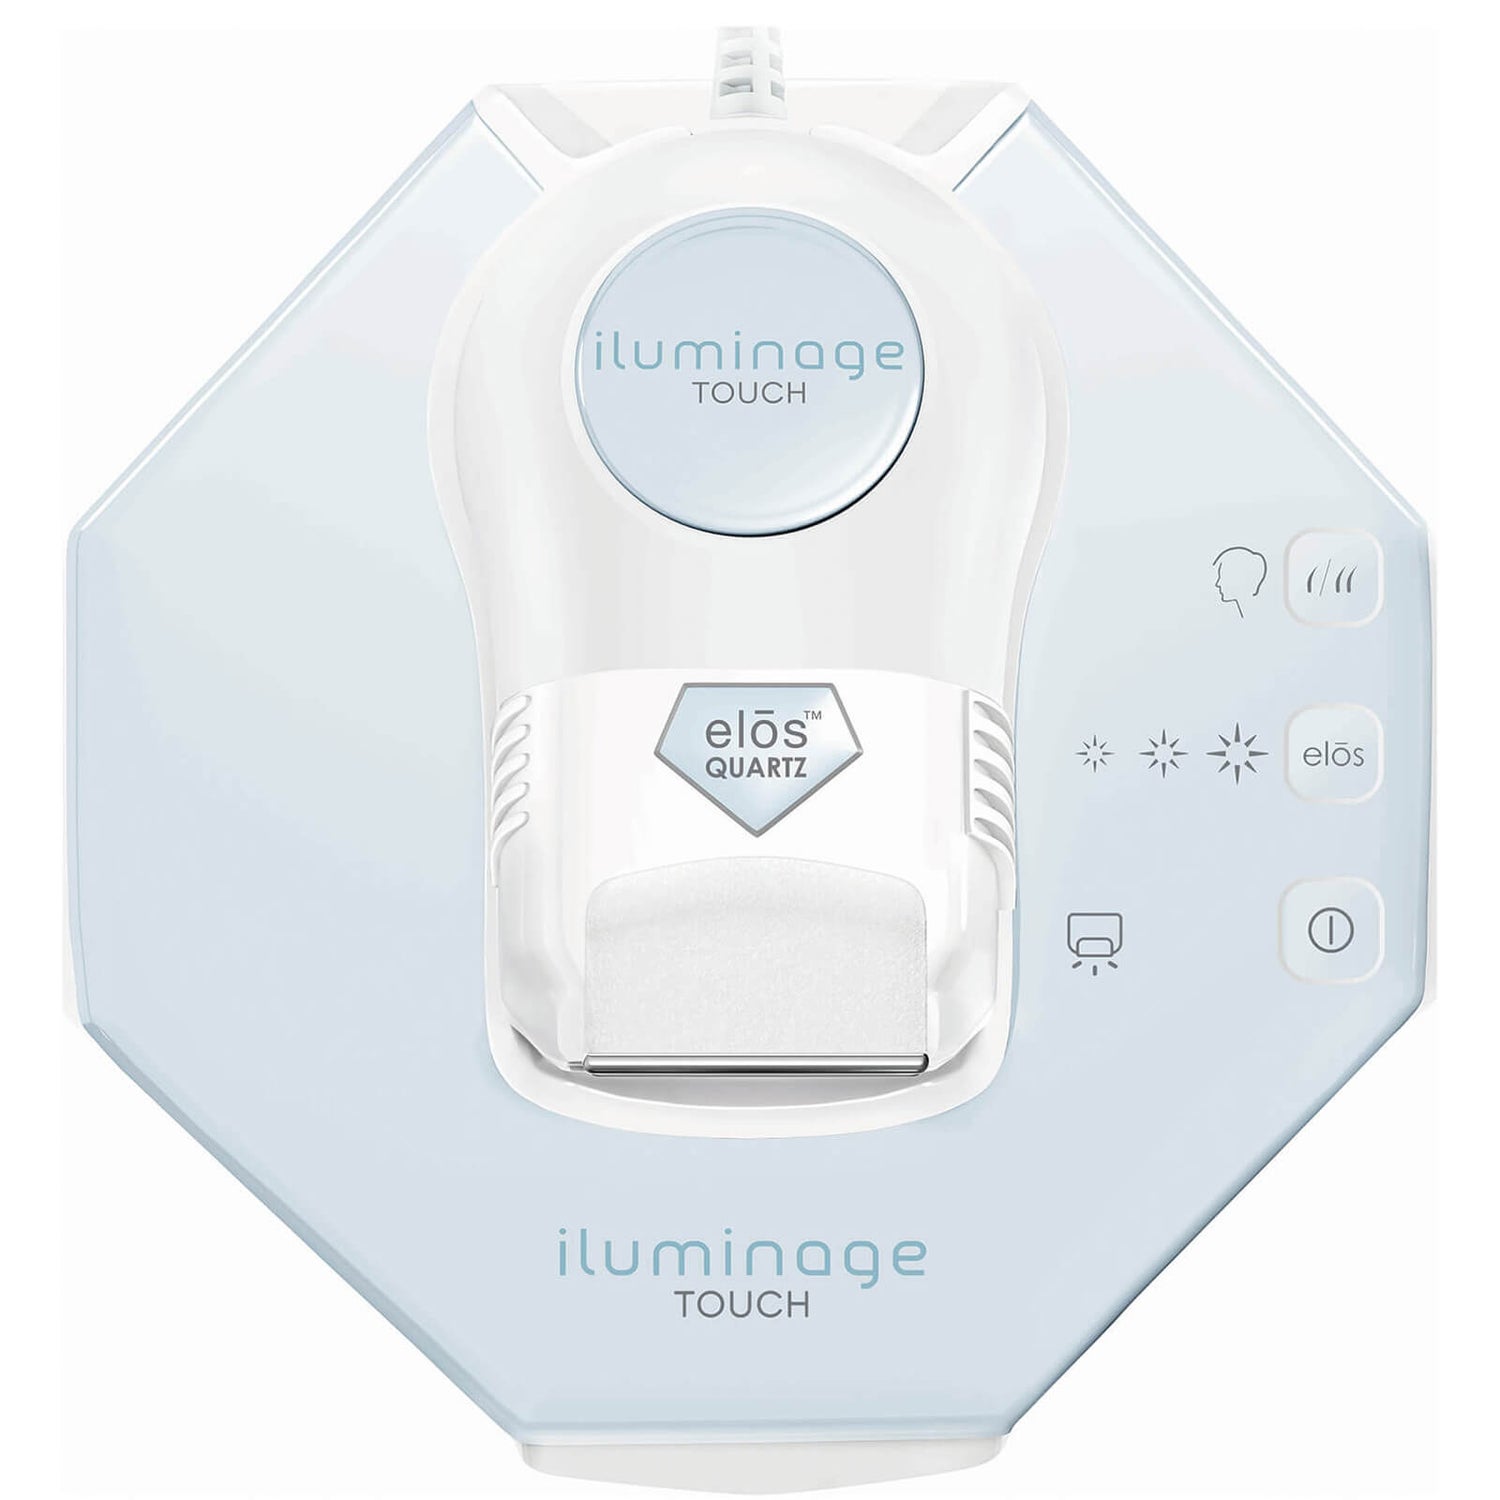 IluminageTOUCH Permanent Hair Remover